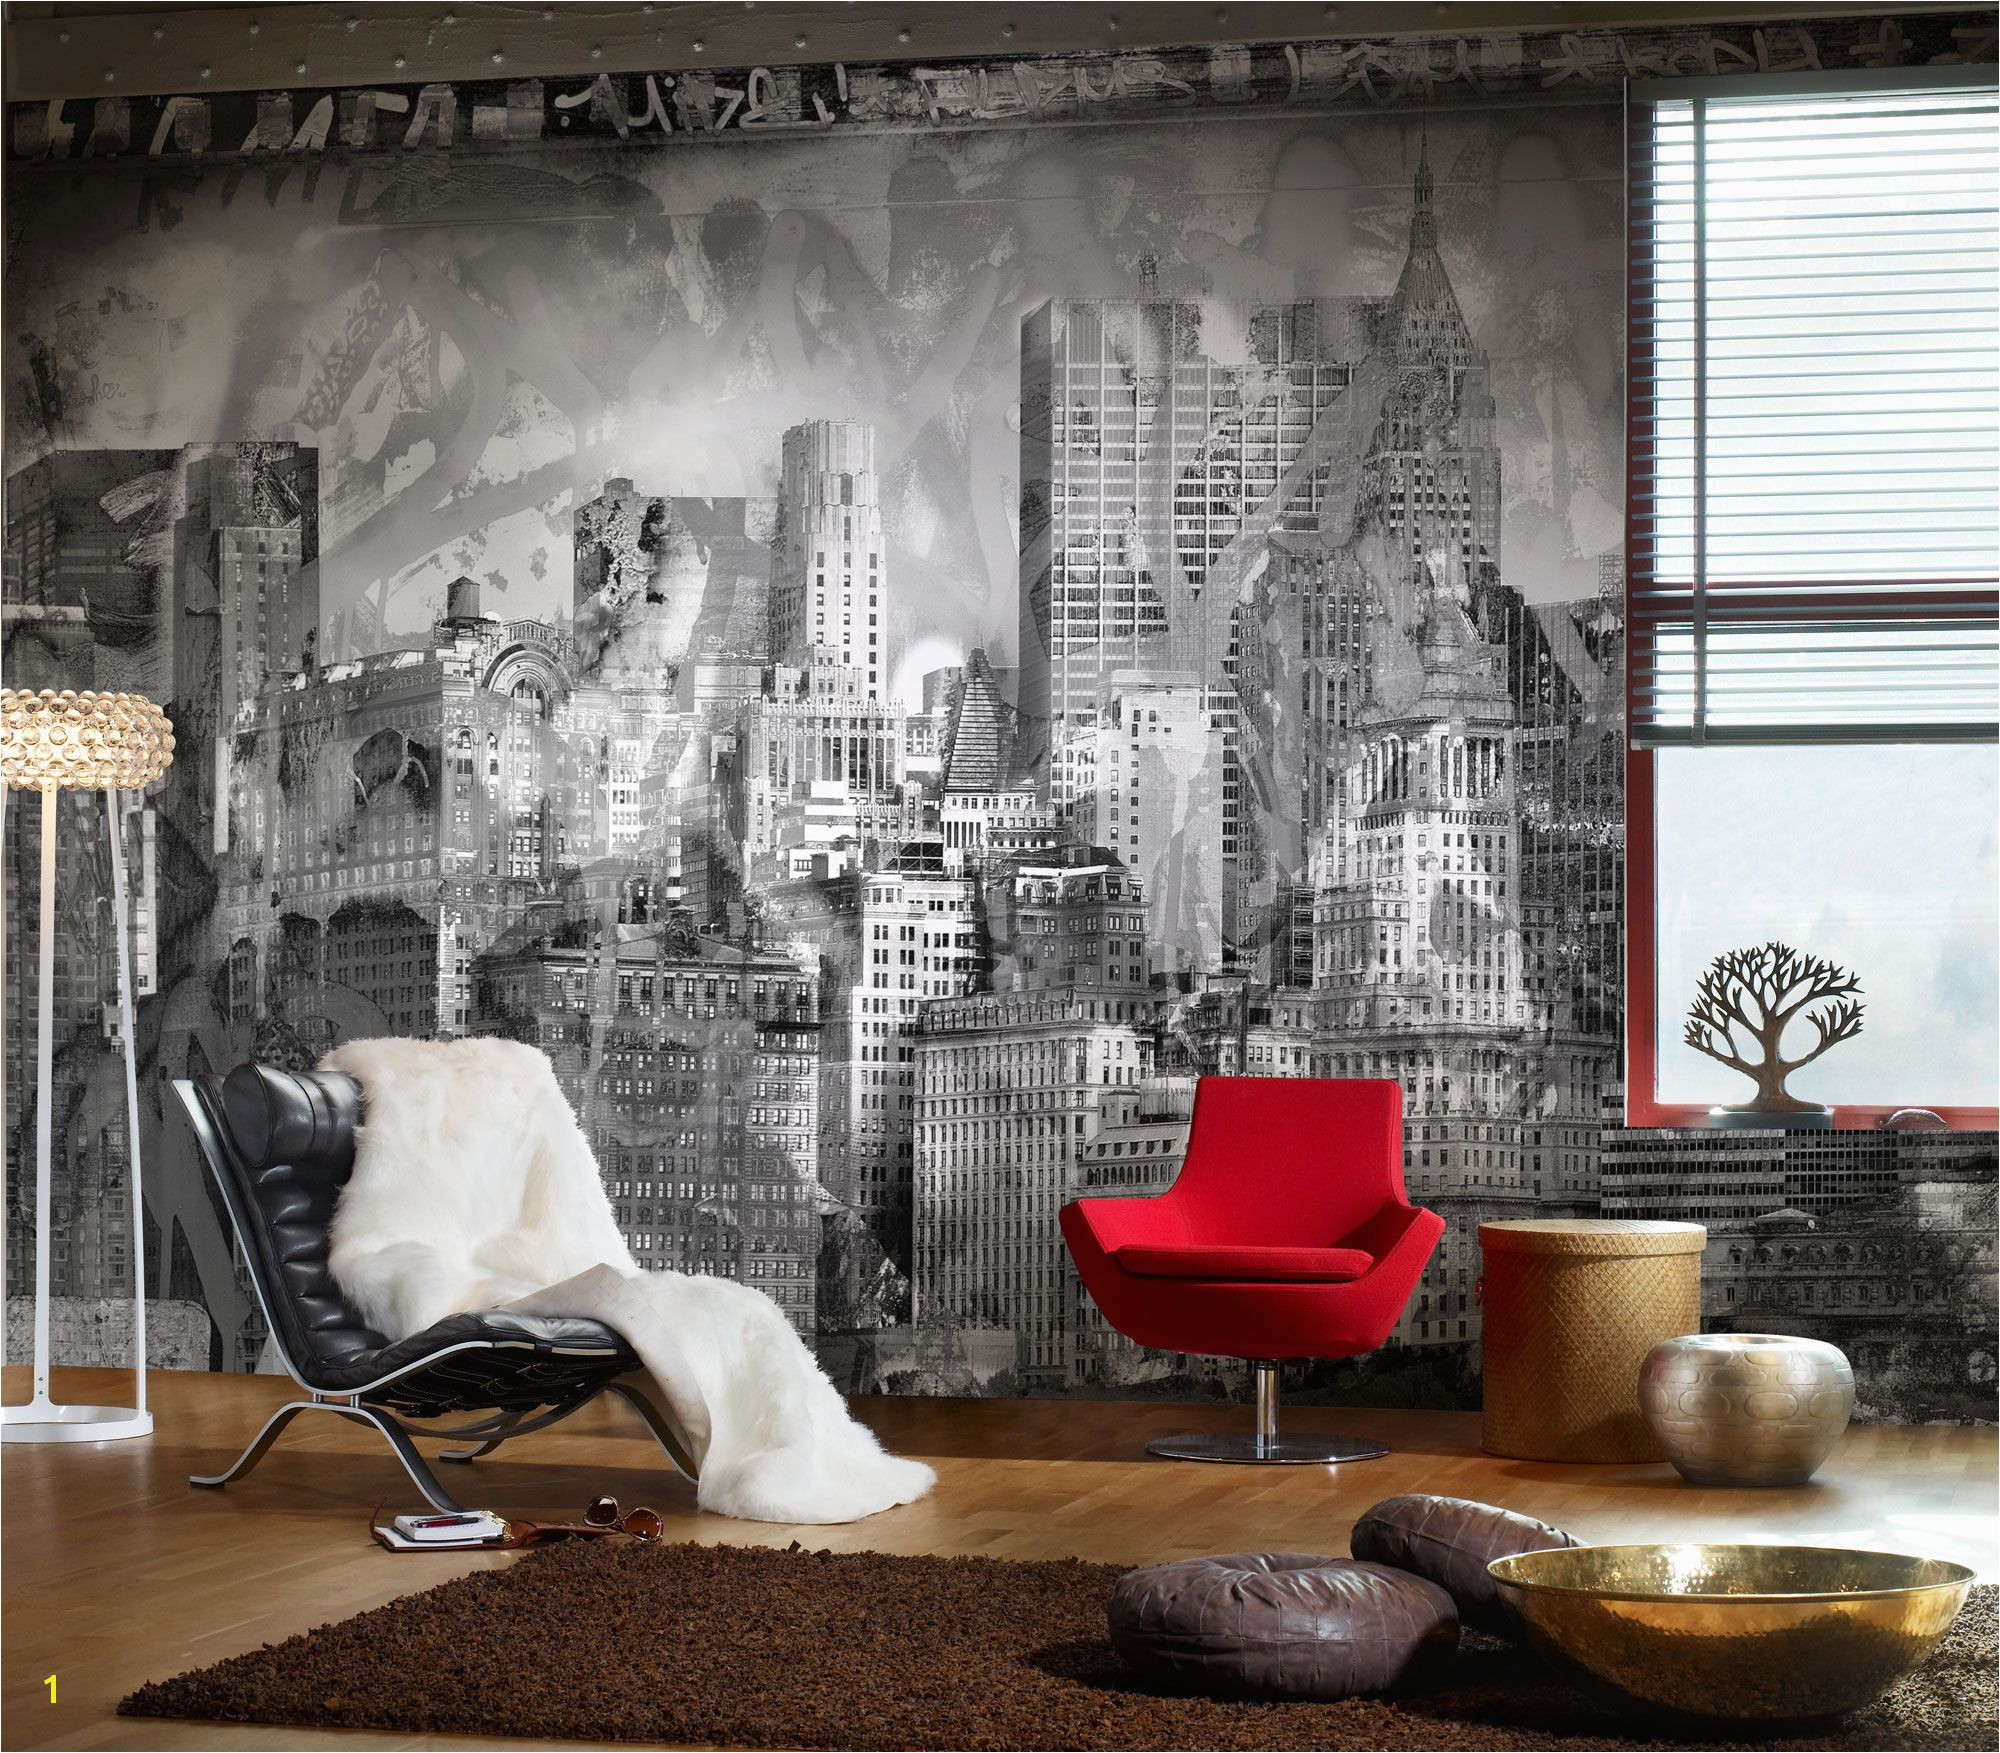 Graffiti City probably the most iconic graffit wallpaper mural from Mr Perswall Available in black and white and colors